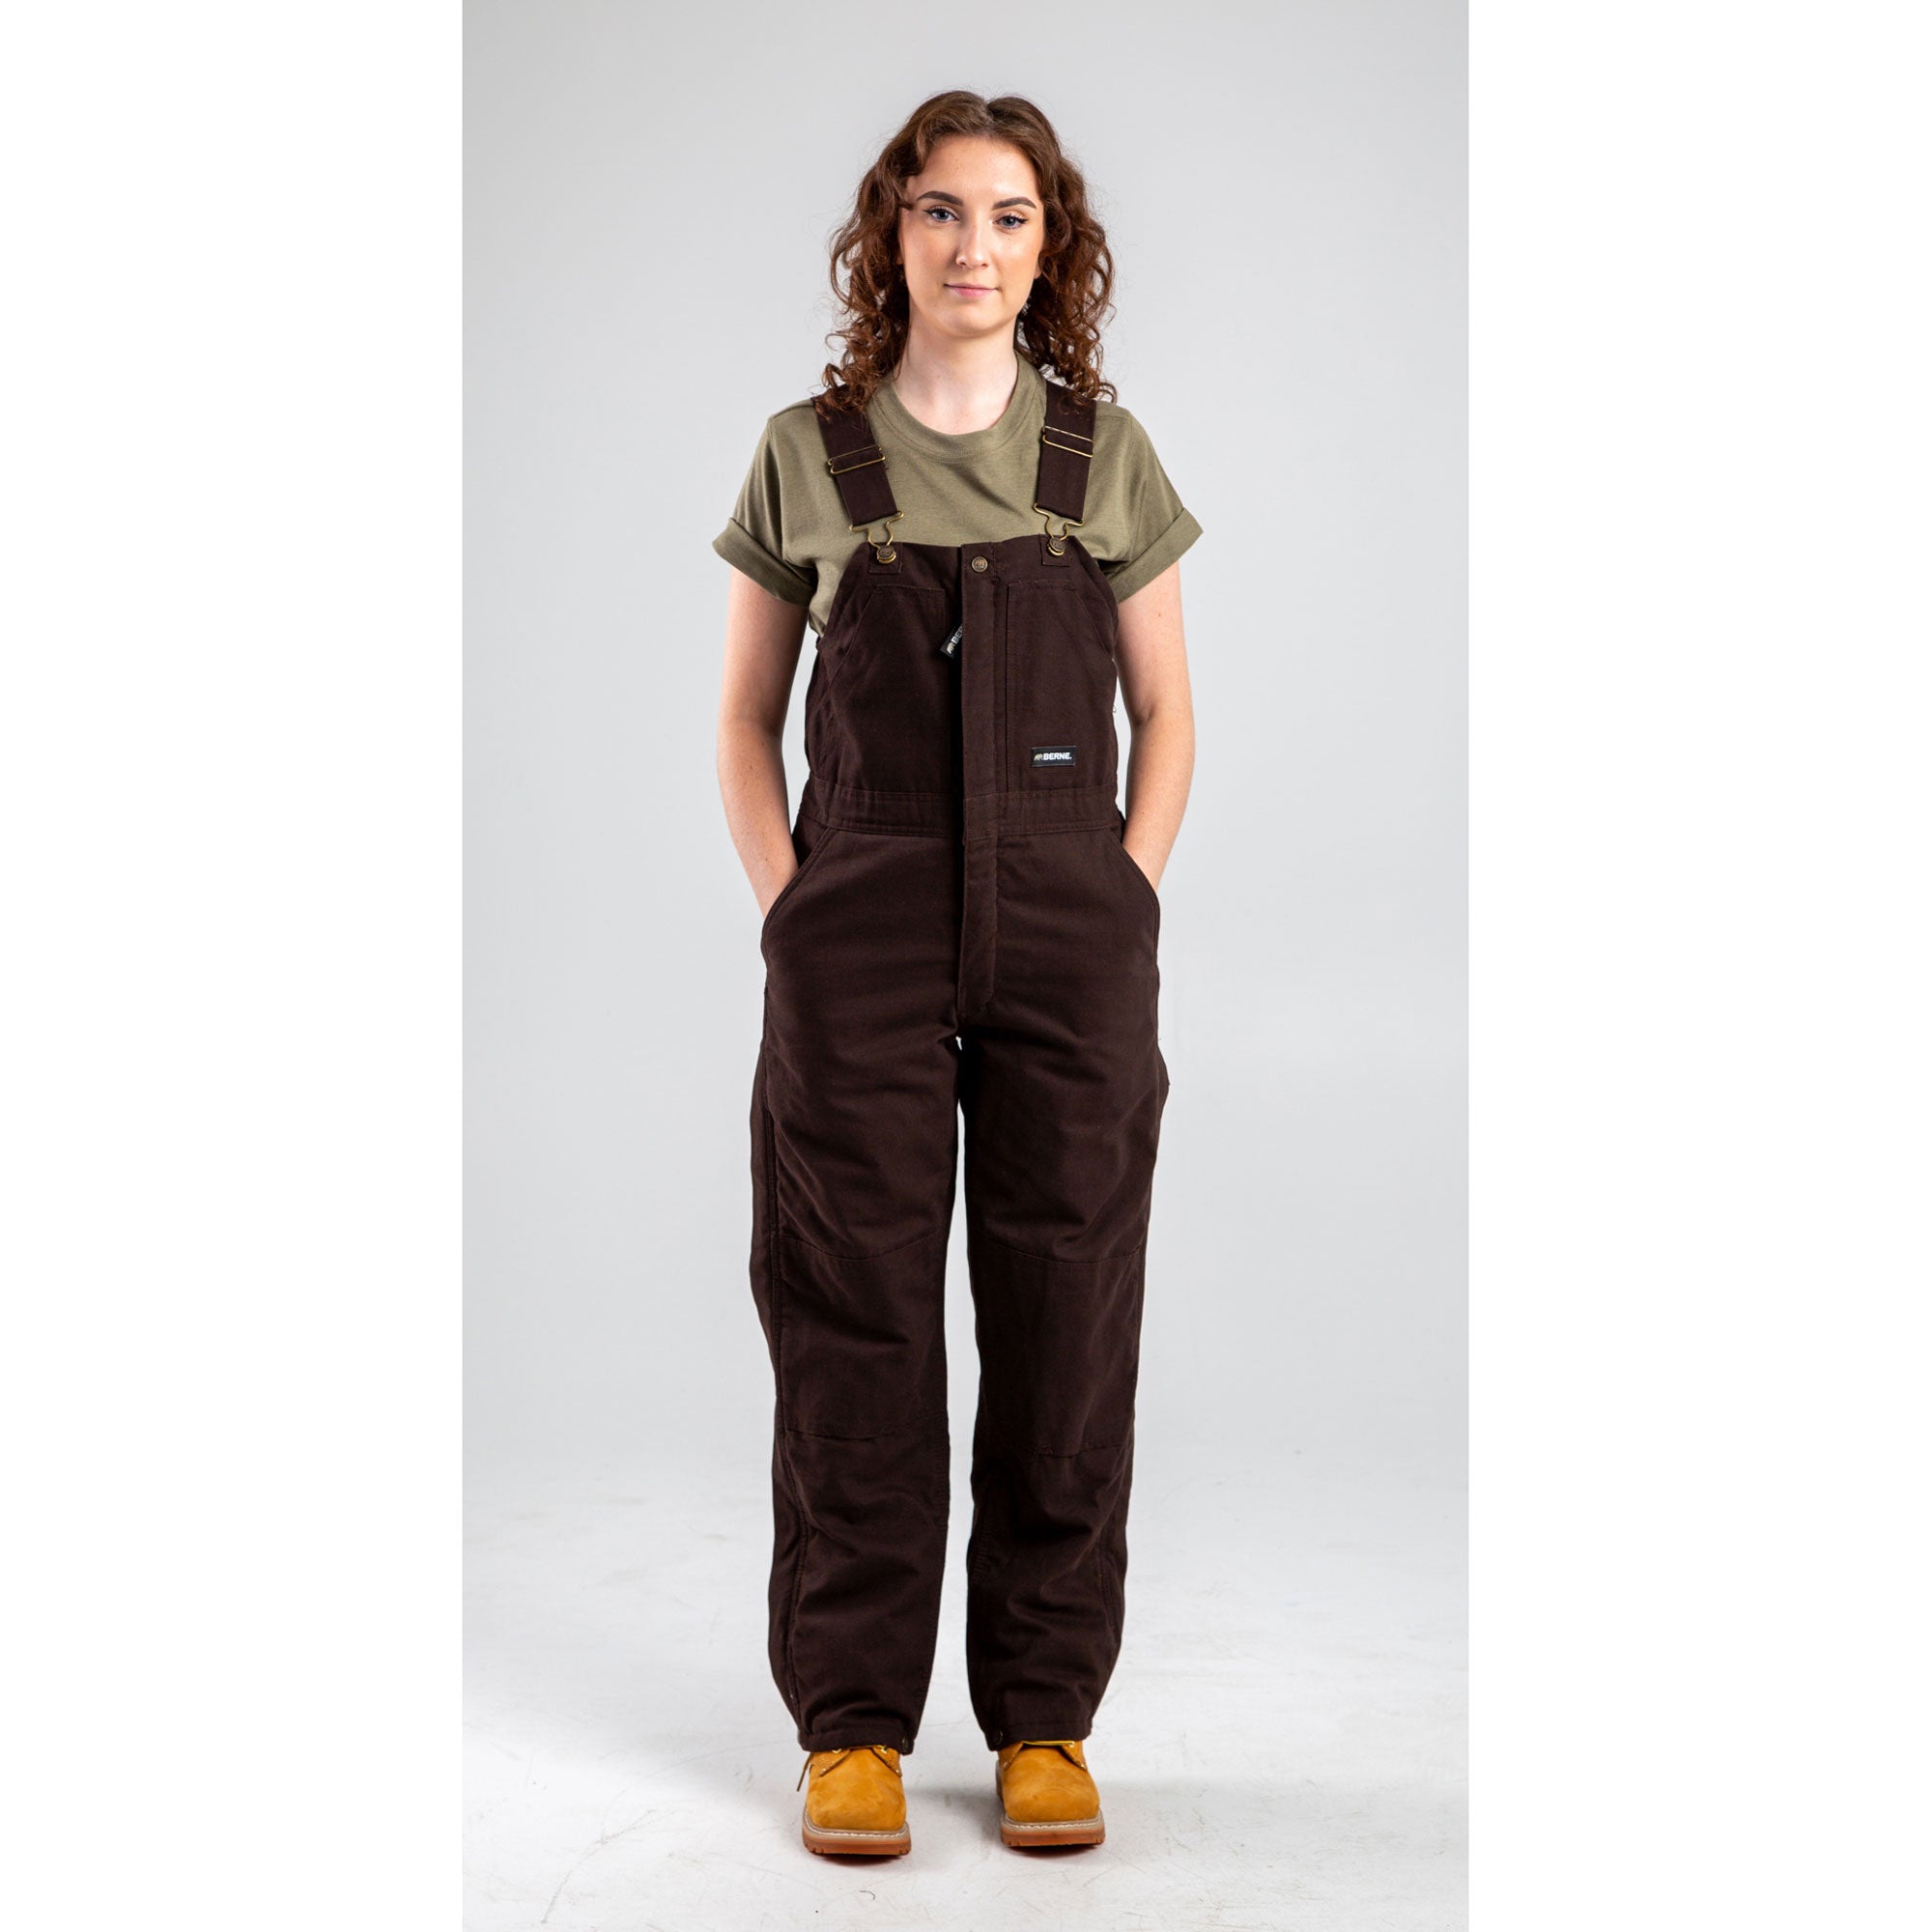 Berne WB515 Women's Softstone Duck Insulated Bib Overall front model